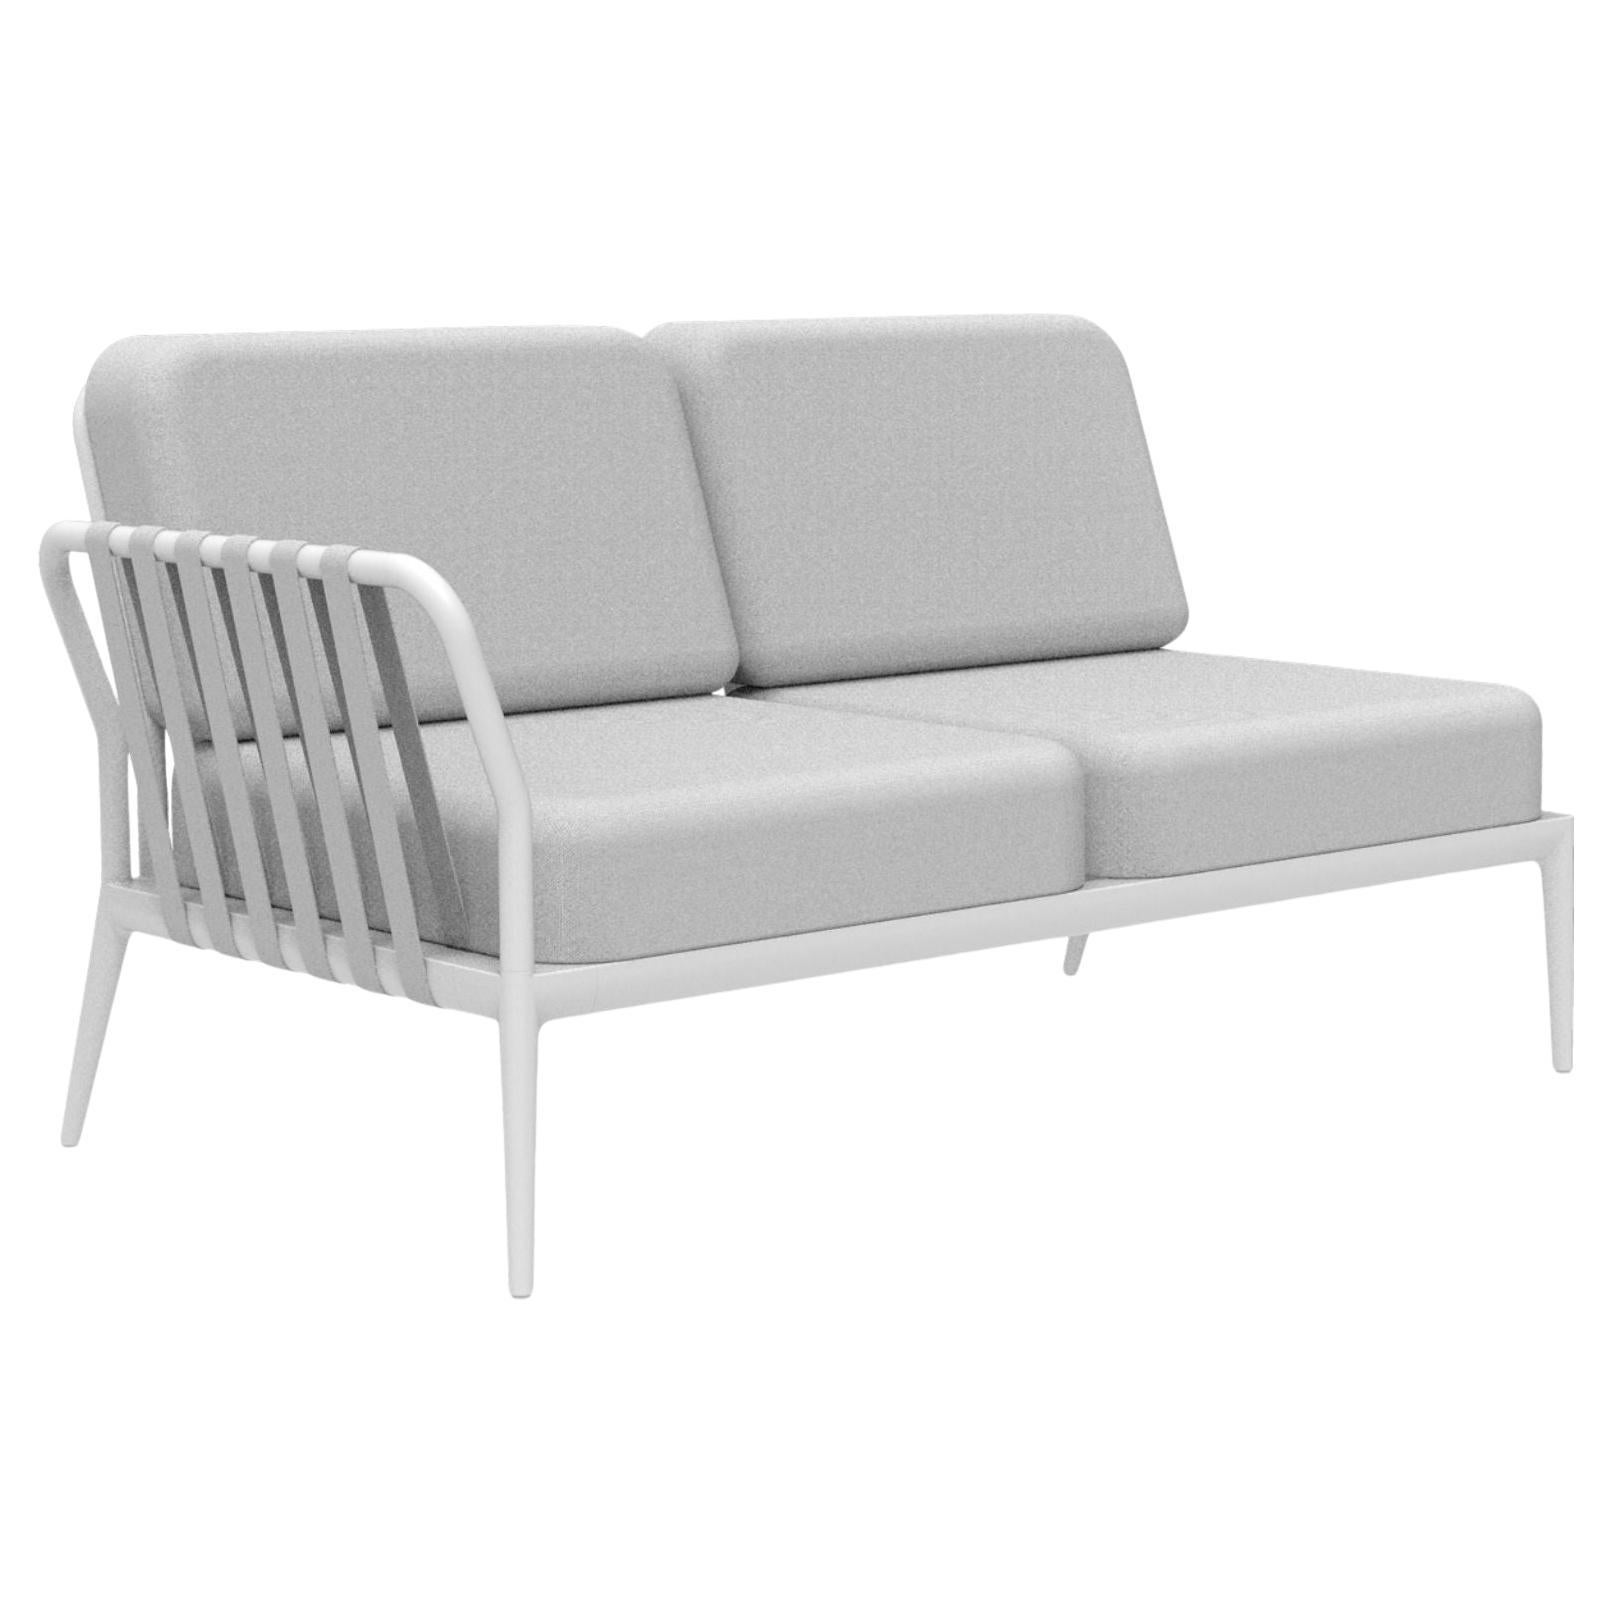 Ribbons White Double Right Modular Sofa by Mowee For Sale